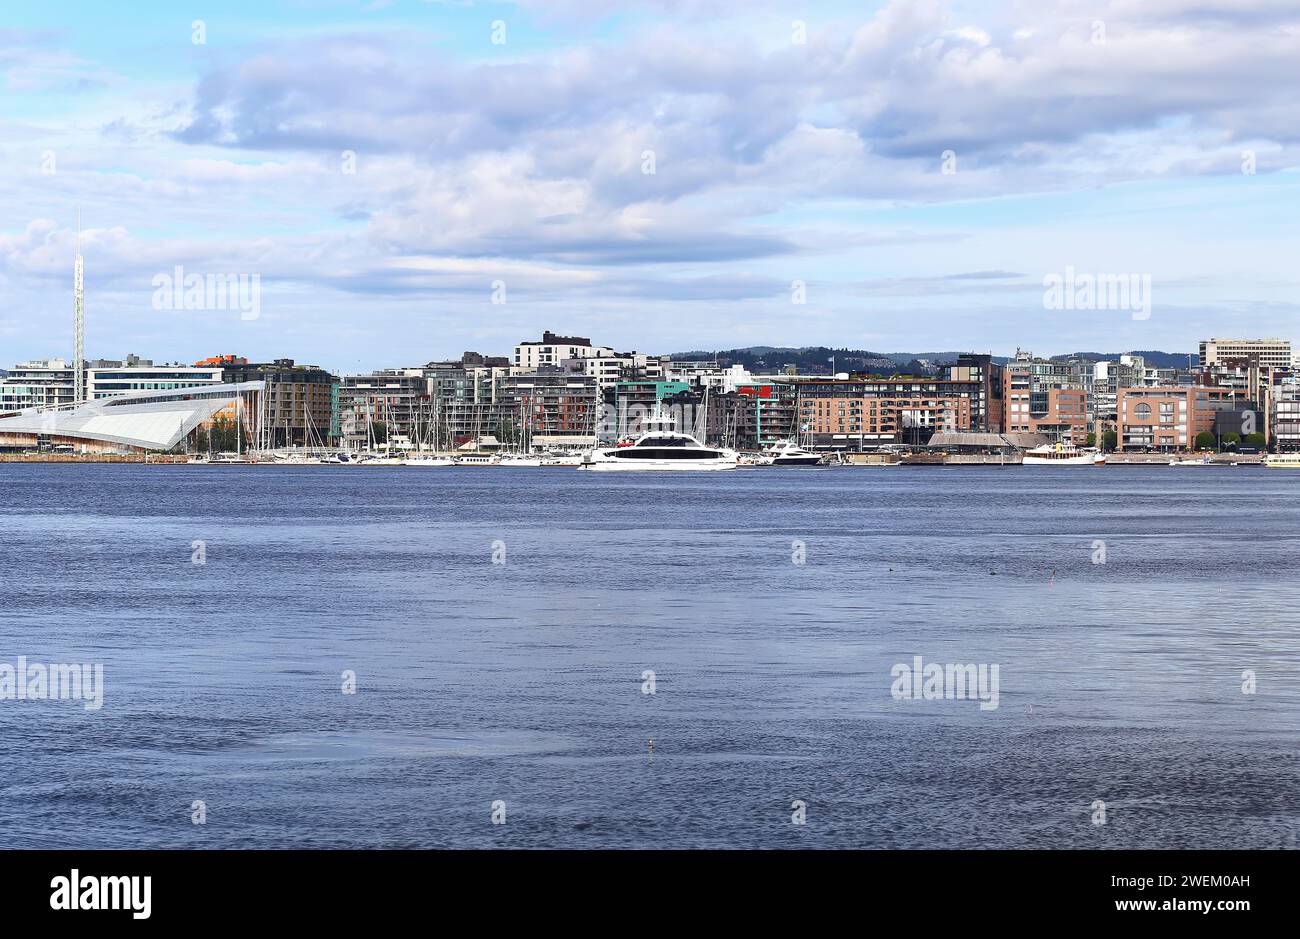 The Oslo Norway Harbor is one of Oslo's great attractions. Situated on the Oslo Fjord in Oslo, Norway Stock Photo